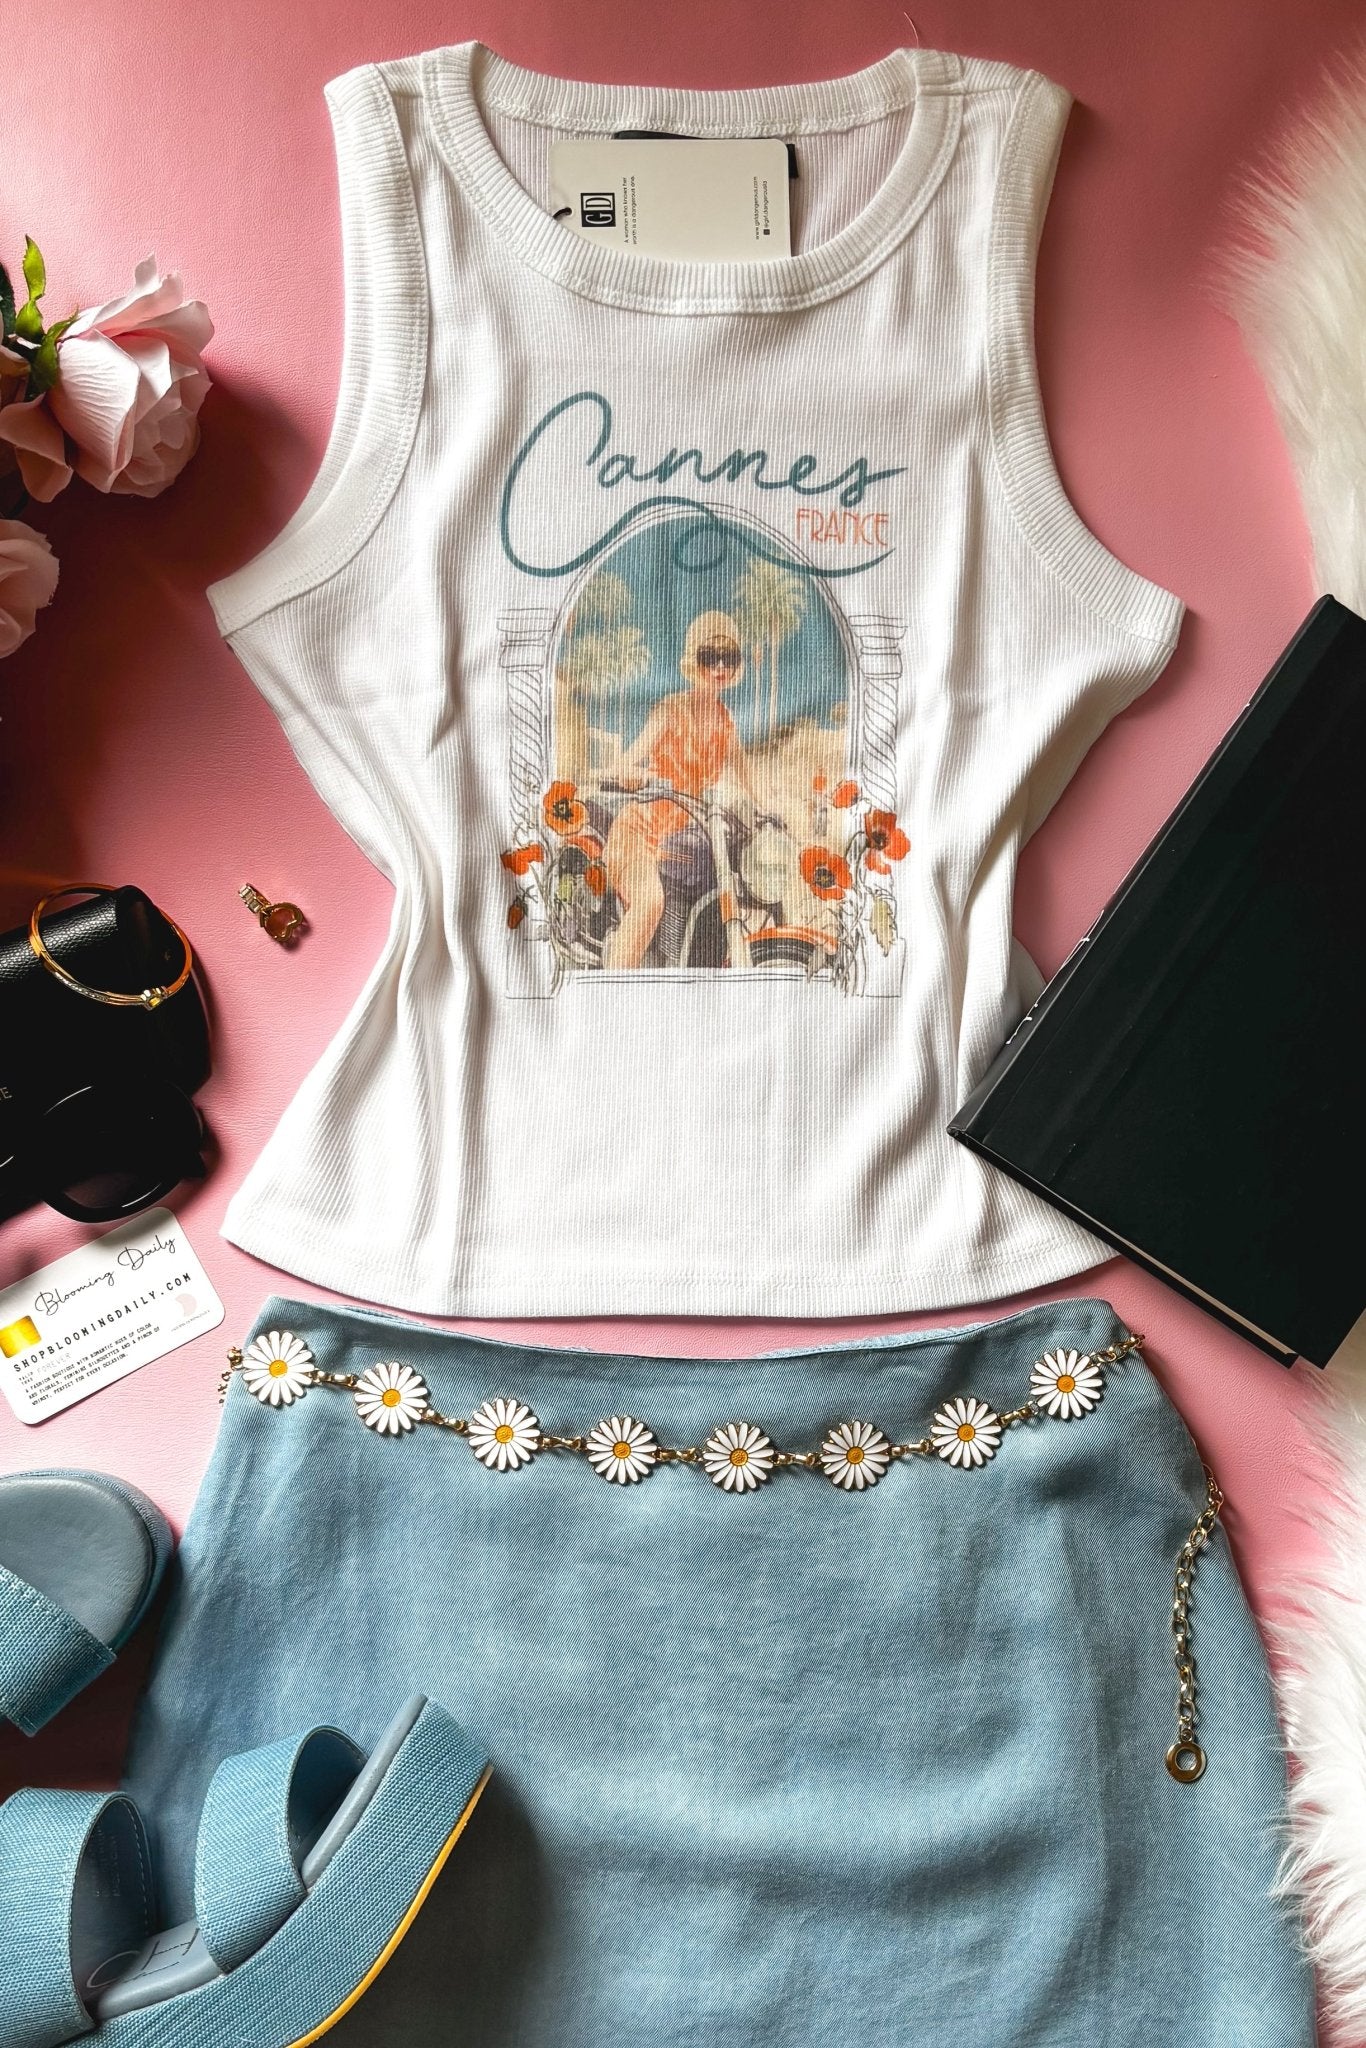 Girl Dangerous | Cannes France Vintage Moto Rib Knit Tank Top - Women's Shirts & Tops - Blooming Daily